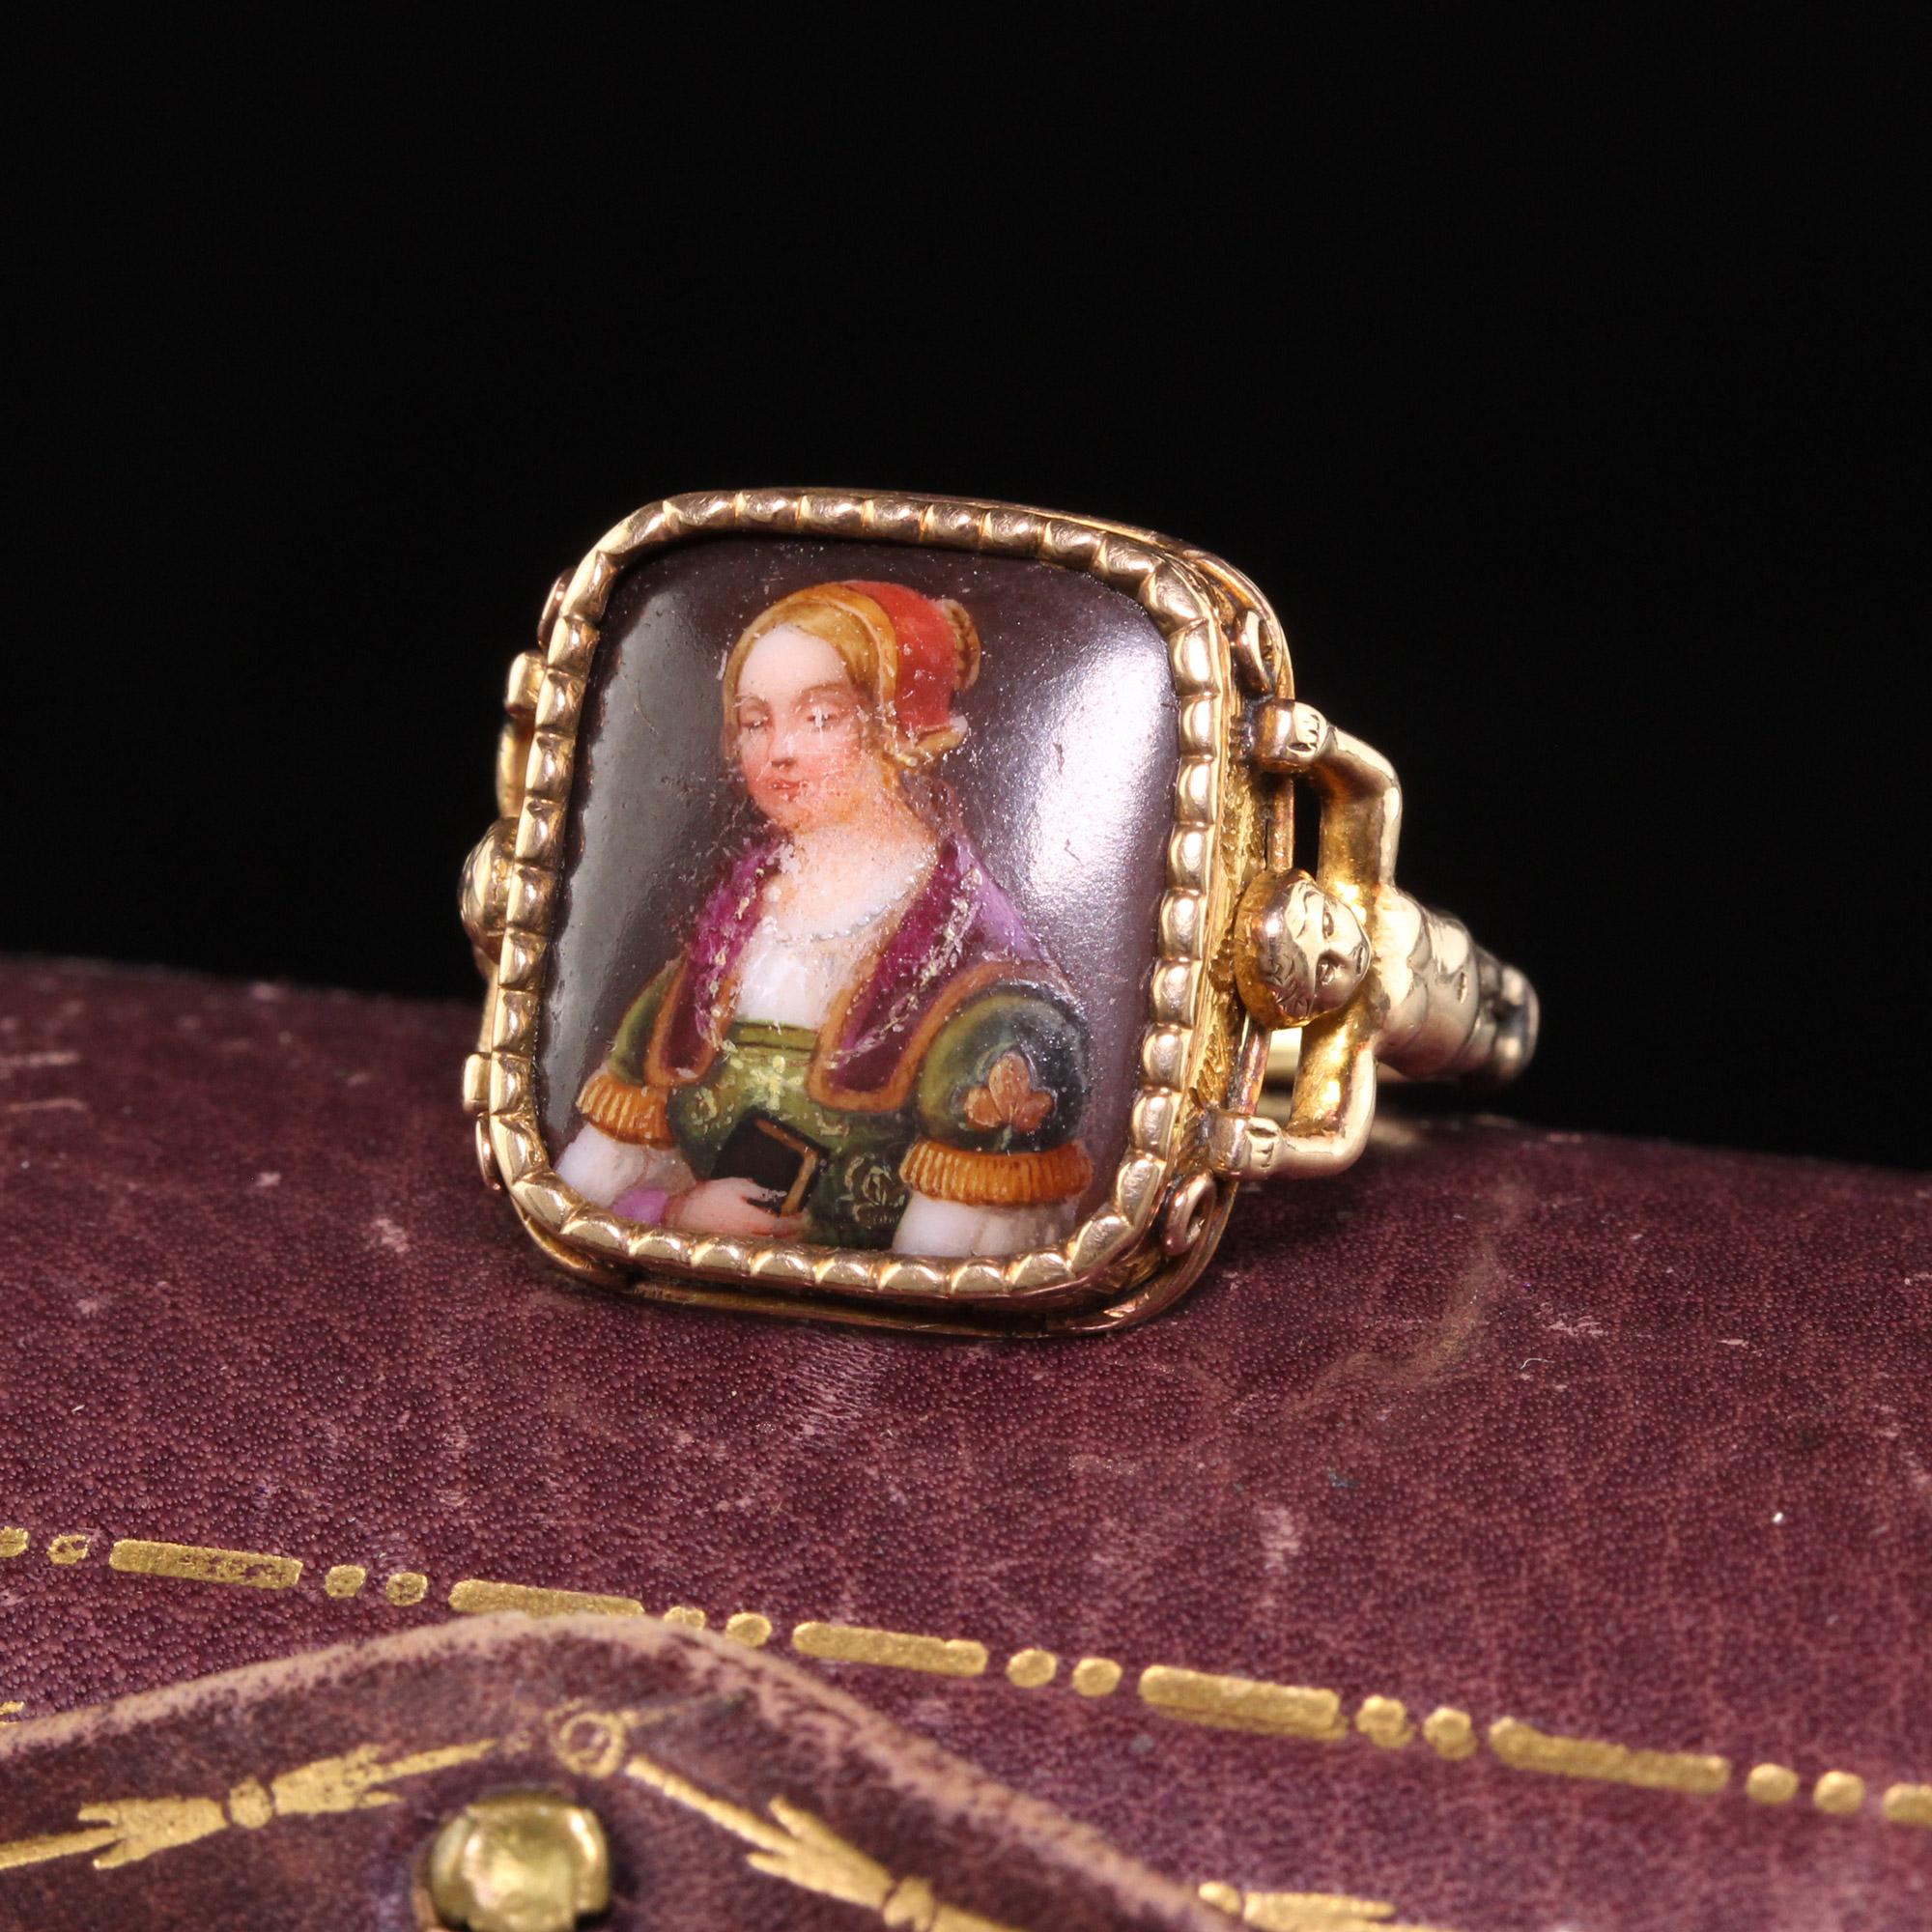 Beautiful Antique Victorian 14K Yellow Gold Unique Portrait Engraved Ring. This incredible ring is crafted in 14k yellow gold. The center holds a porcelain painting of a woman in fine clothing. The back of it is engraved M.I. MEE 1902. The sides of